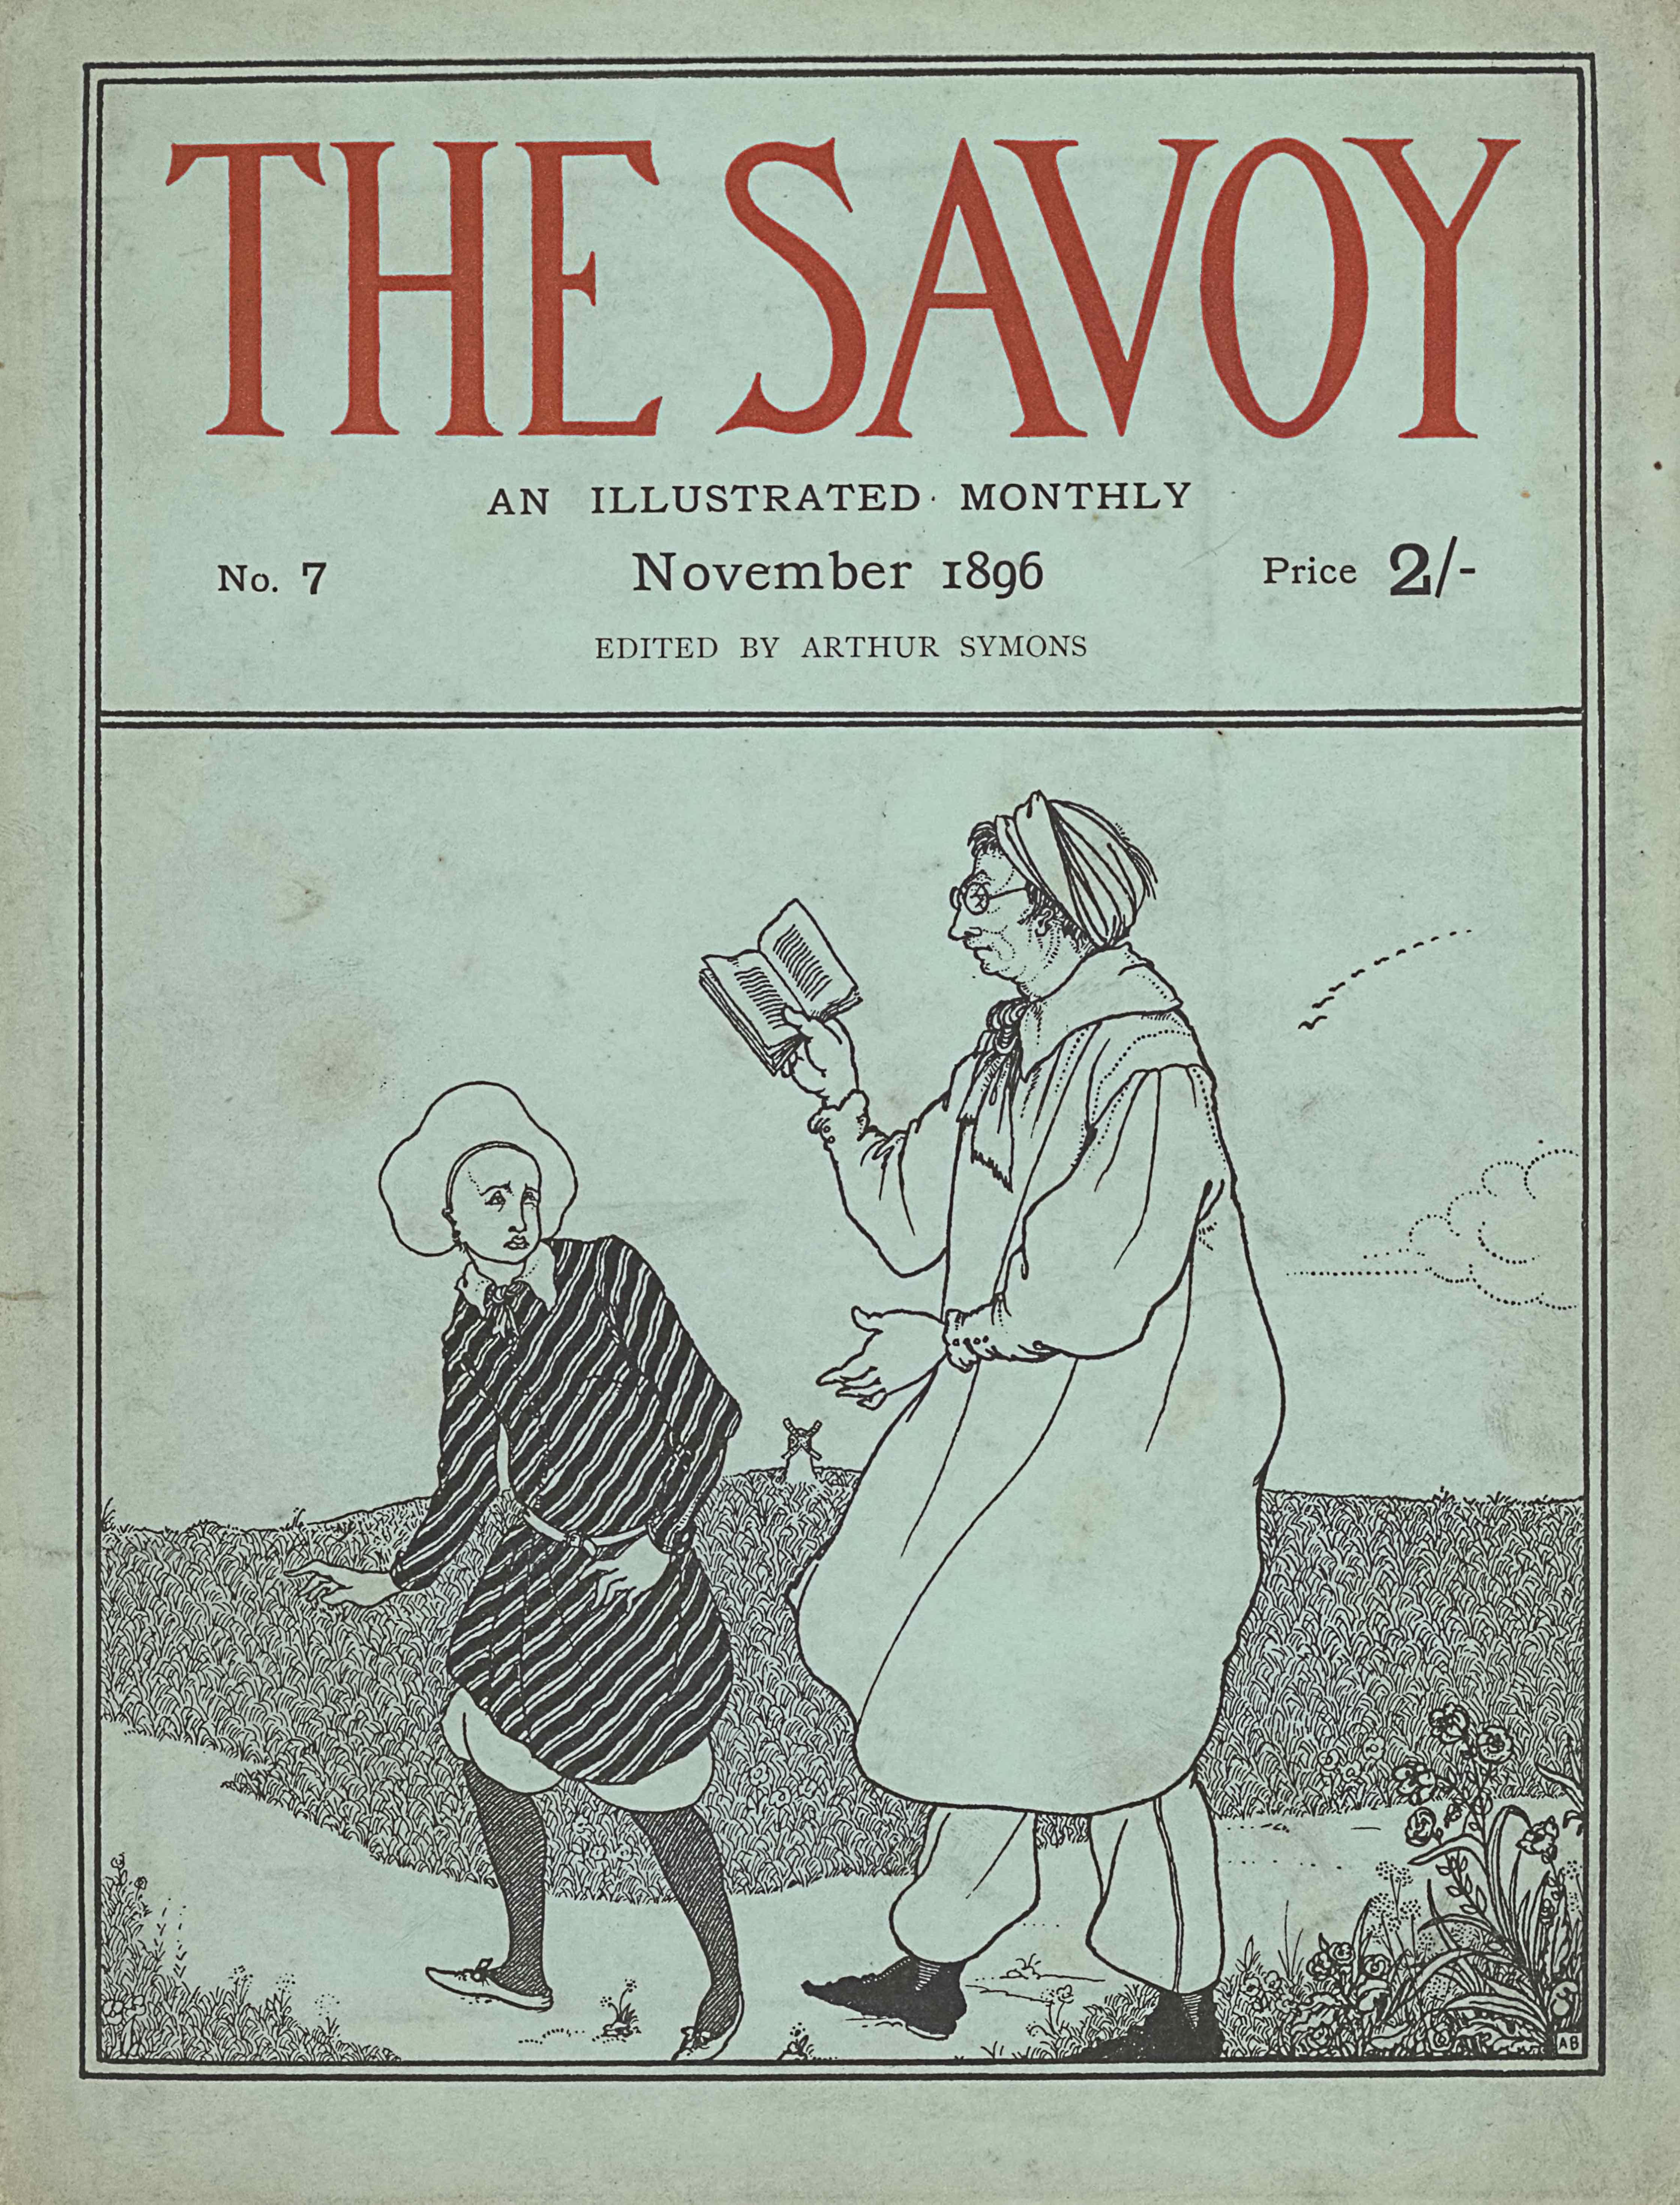 The double-line framed cover, in portrait orientation, combines a line-block reproduction of a pen-and-ink design with letterpress. Across the top of the page appears the title in display type: “THE SAVOY” [large caps]. Below the title is the centred subtitle in a smaller font that reads: “AN ILLUSTRATED MONTHLY” [caps]. On the subsequent line below, left aligned, is “No. 7”. Centred is the date: “November 1896” and right aligned is: “Price 2/-”. On the line below and printed in a lighter font reads: “EDITED BY ARTHUR SYMONS” [small caps]. This publishing information takes up the top third of the cover design, within its own bordered section. The illustration below, occupying two-thirds of the cover design, features two central figures on a pathway curving across the foreground with short plants and grasses in front of the path. The figure on the right is a man facing in profile to the left; he is almost the height of the illustration section of the cover. He stands midstep with his left elbow at his side and his left hand stretched out before him. His right hand is raised to eye-level and in it, he holds an open book. He is wearing a wrap or turban around his head with his hair sticking out the front and back. He is wearing round glasses and has an ascot tied about his neck. His white smock extends just beyond his knees. His white pants are tucked into his back shoes. To his left on the path is a smaller, Pierrot figure, turning back to look up at the first man. Pierrot stands at shoulder height to the first figure. Pierrot has a downturned mouth and downturned eyes. He is wearing a striped tunic that extends to his knees with a thin white belt tied around his waist. The bottoms of his breeches are tucked into knee-length black socks and he has white shoes. Stretching out past the pathway, in the background, is a field that rises to a horizon a third of the way up the page. At the horizon’s edge, centred in the middle ground, stands a four-bladed windmill. The sky is clear other than a few birds in a curving line and a cloud on the right edge. In the foreground on the path stand two figures. Aubrey Beardsley’s initials “AB” [caps] are featured in a white box in the bottom right corner of the image.